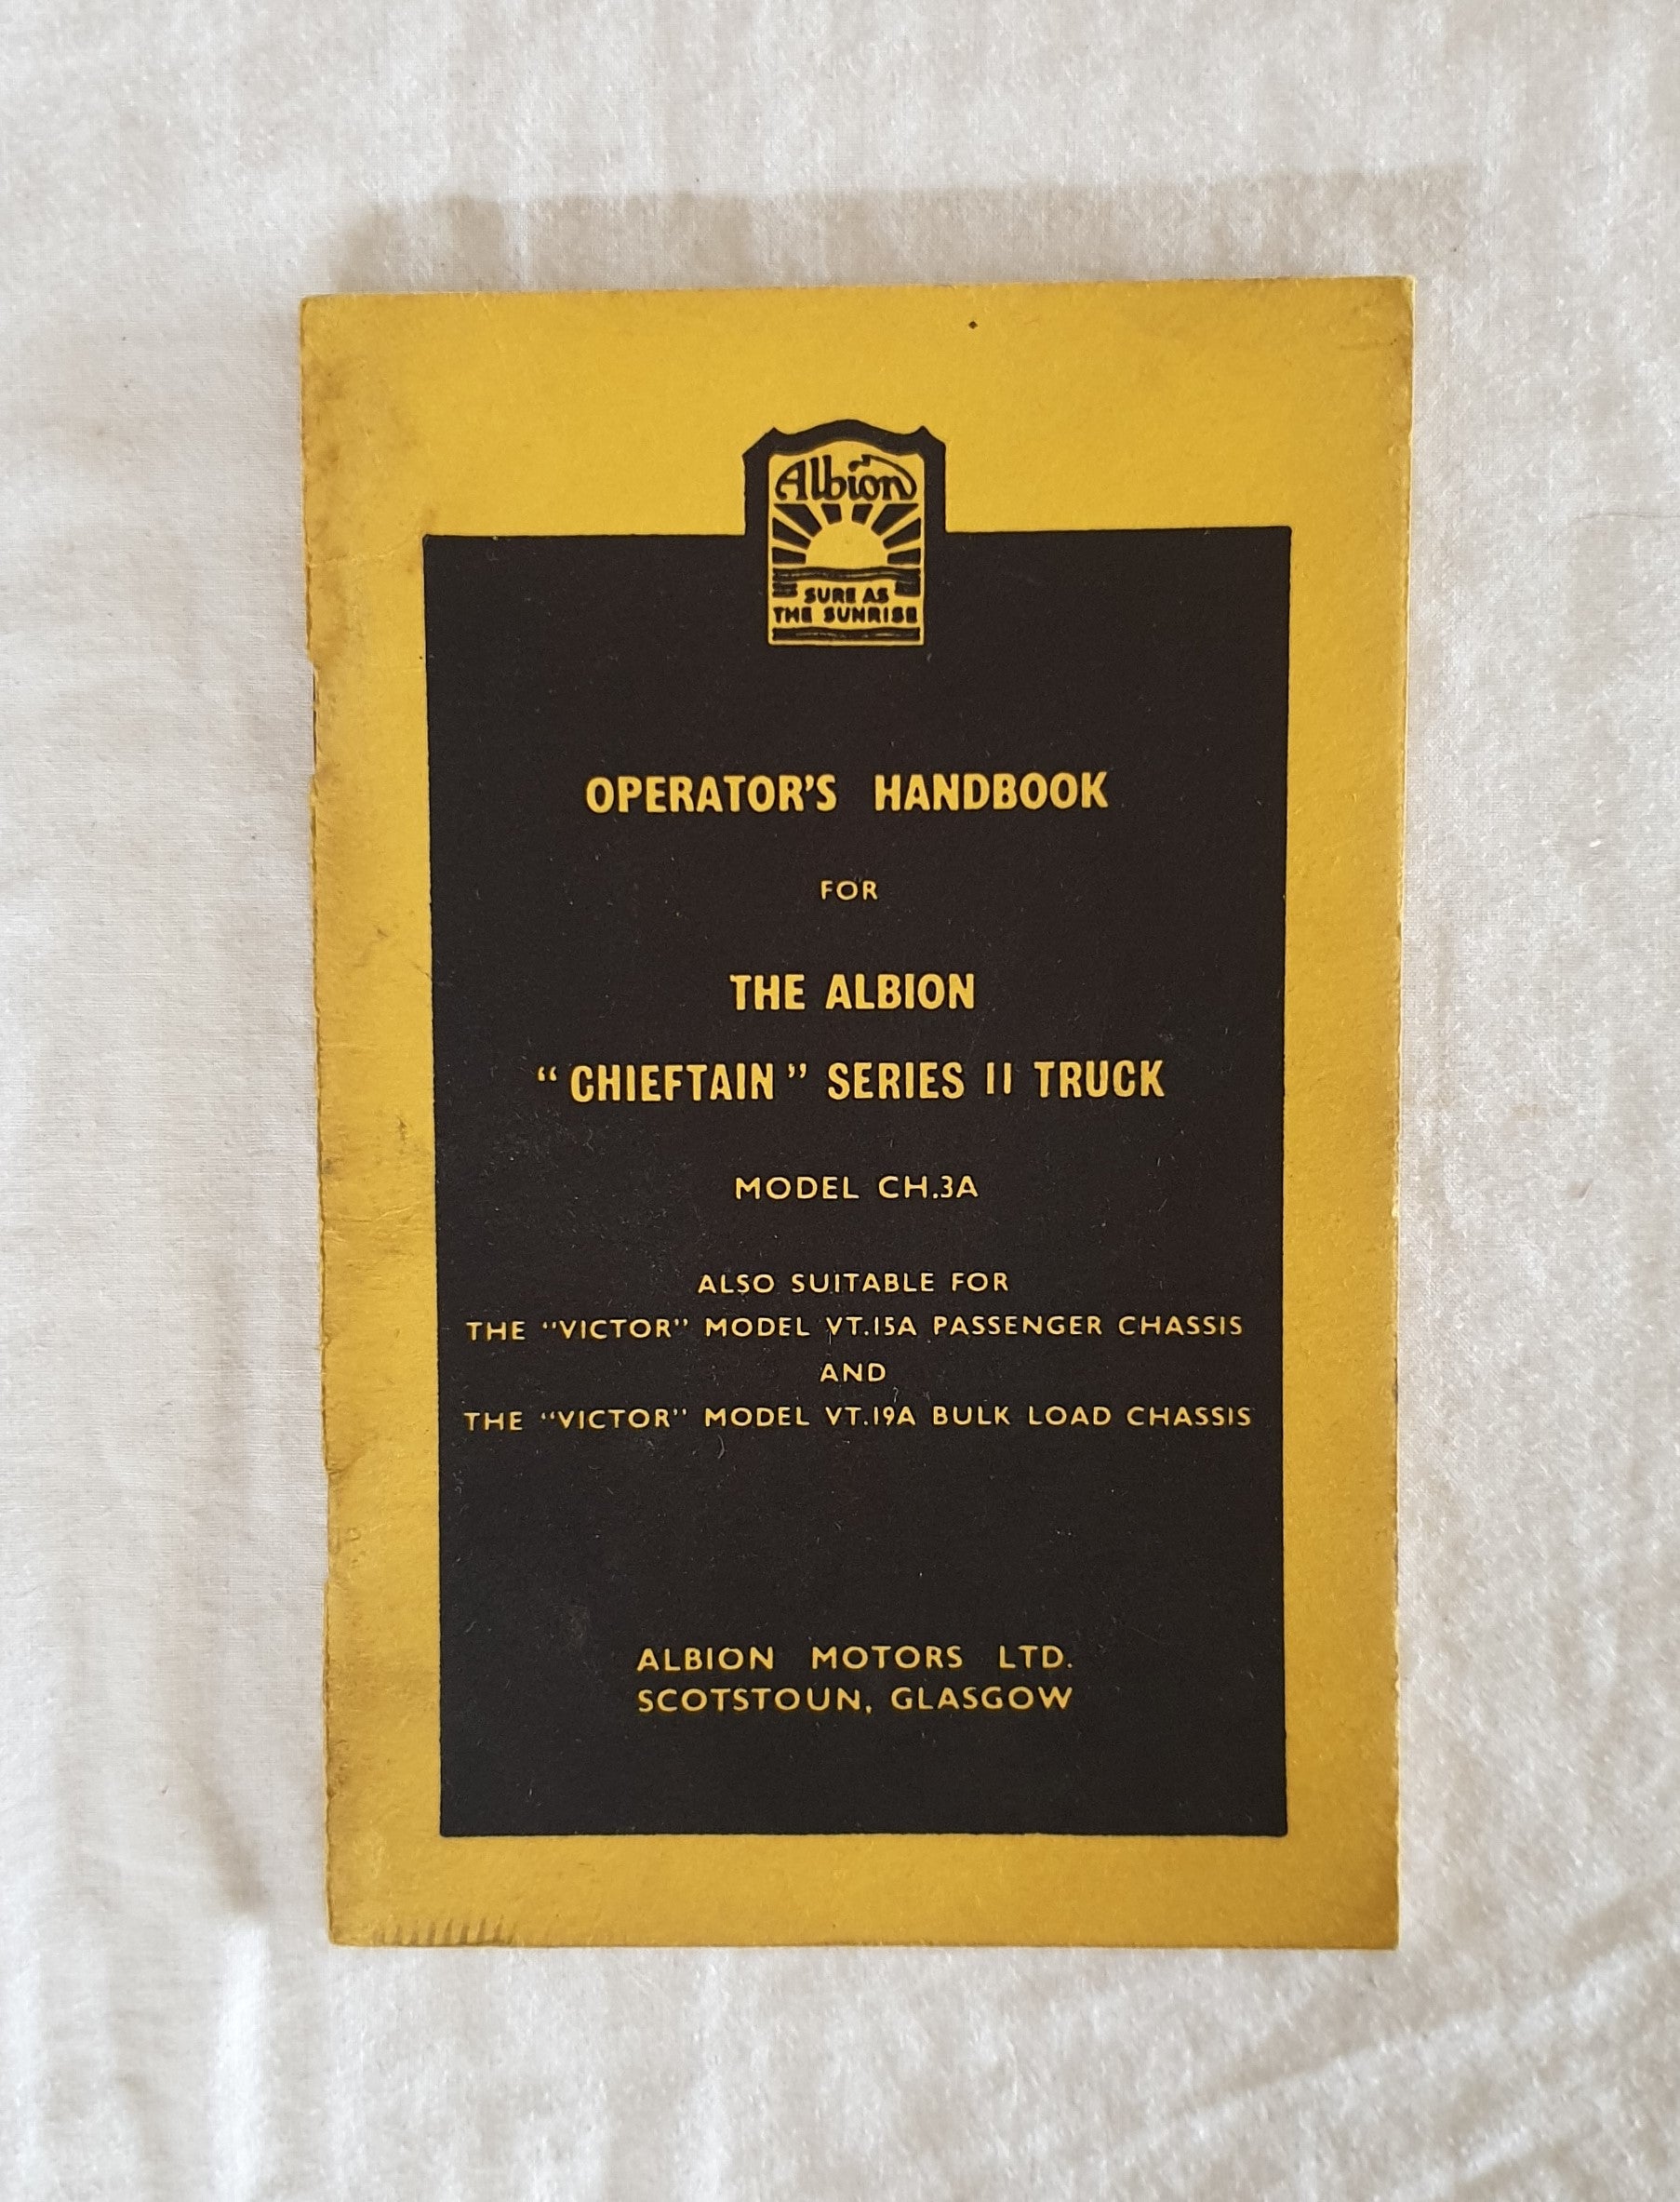 Operator's Handbook for The Albion "Chieftan" Series II Truck  Model CH.3A